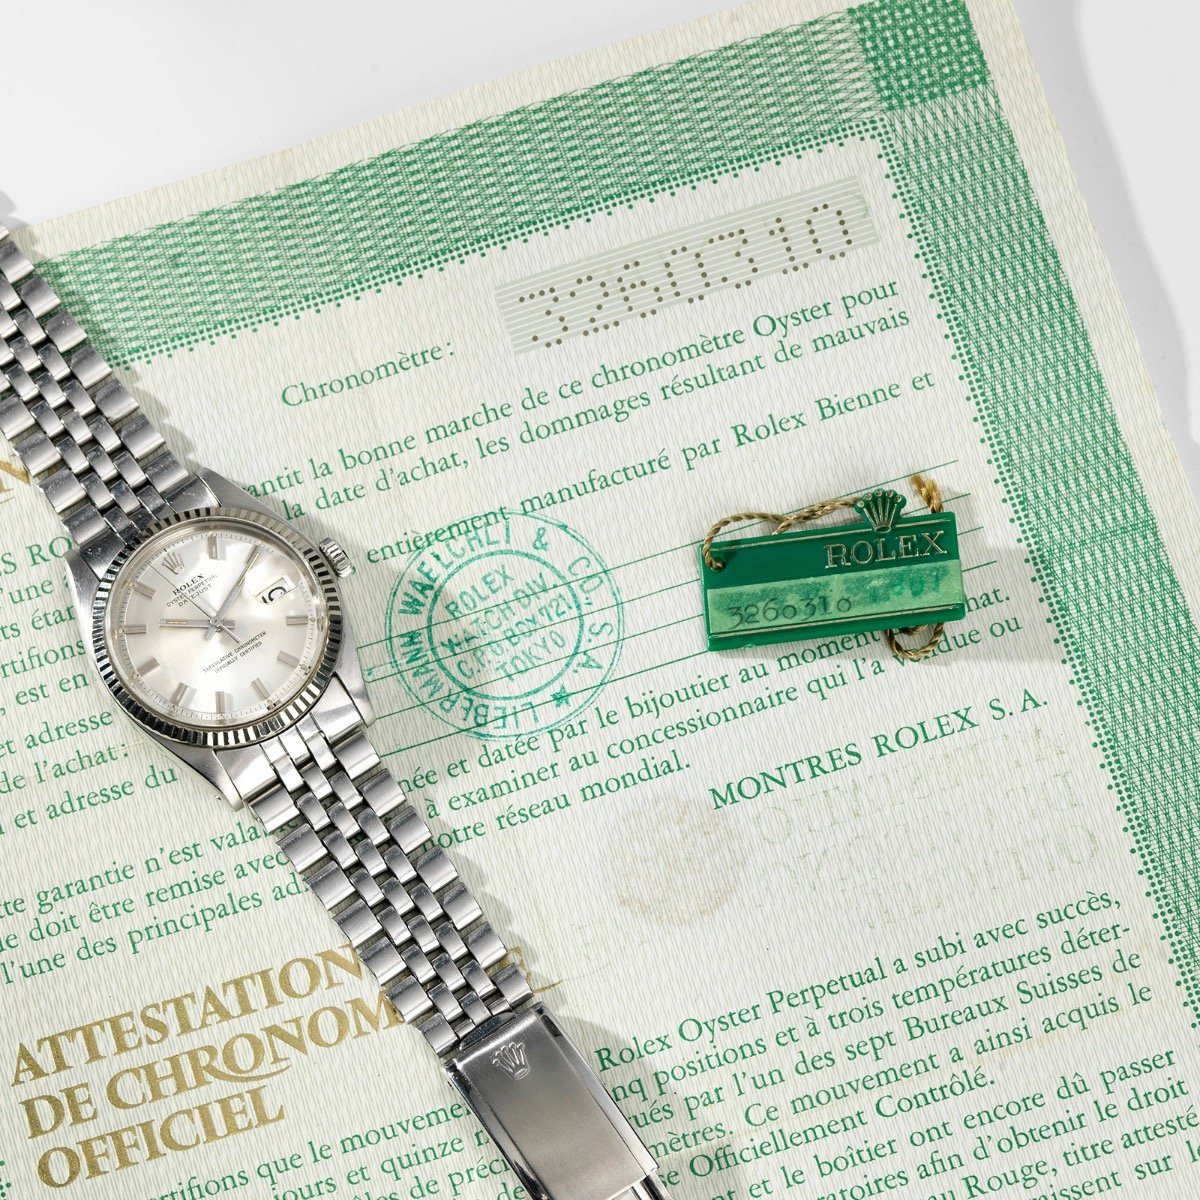 Rolex Datejust Wide Boy Dial Ref. 1601 with papers